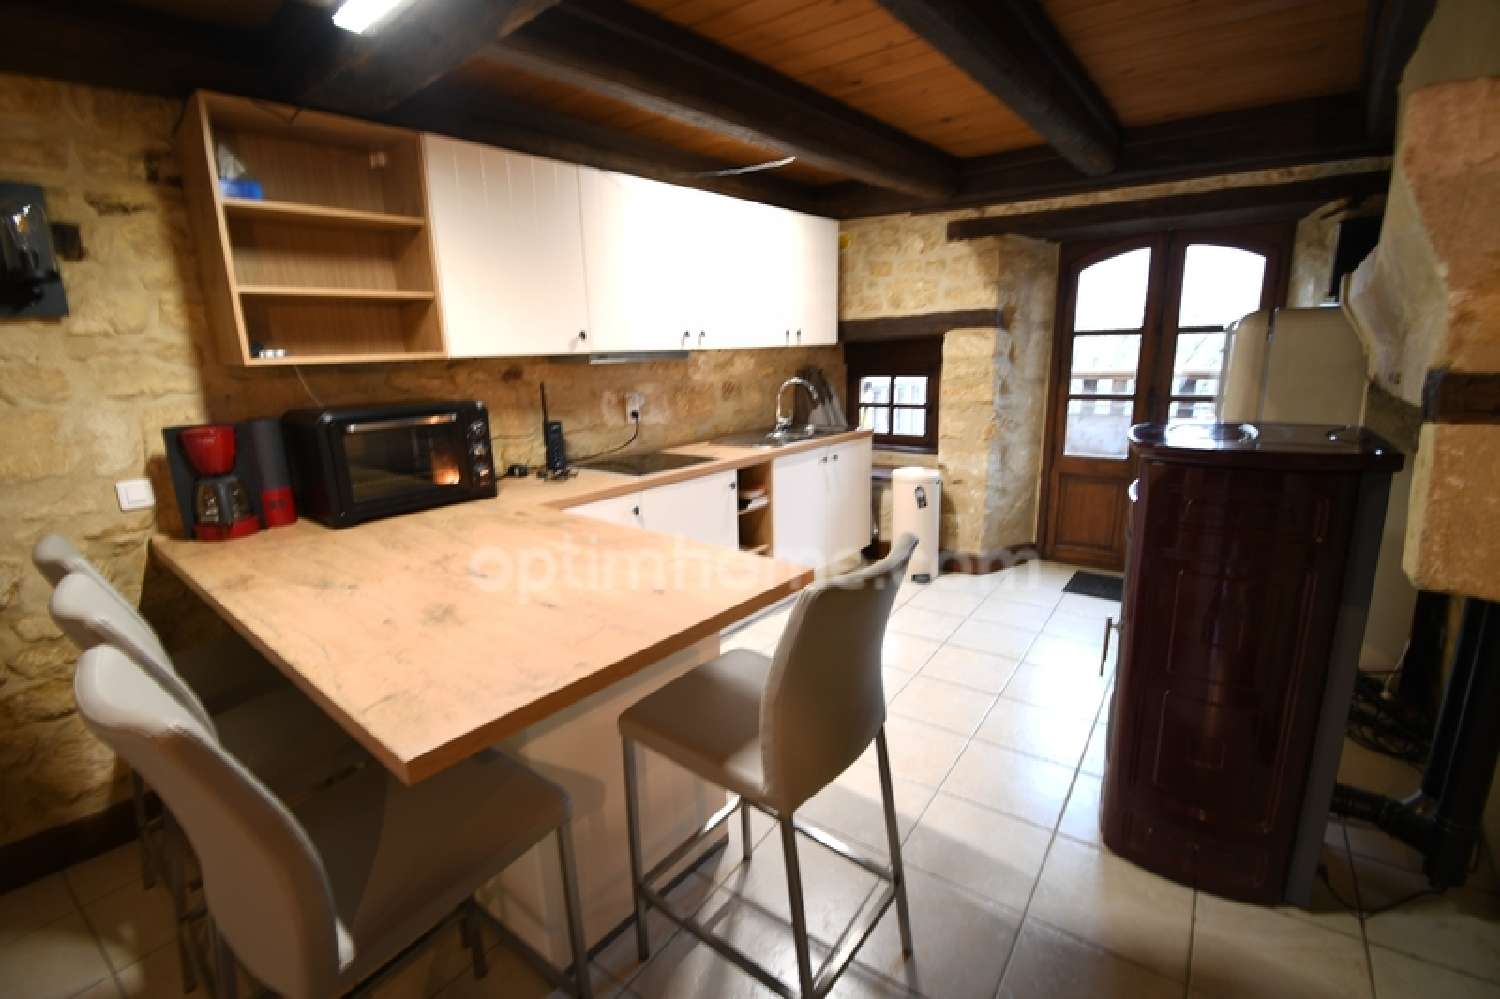  for sale house Marville Meuse 3